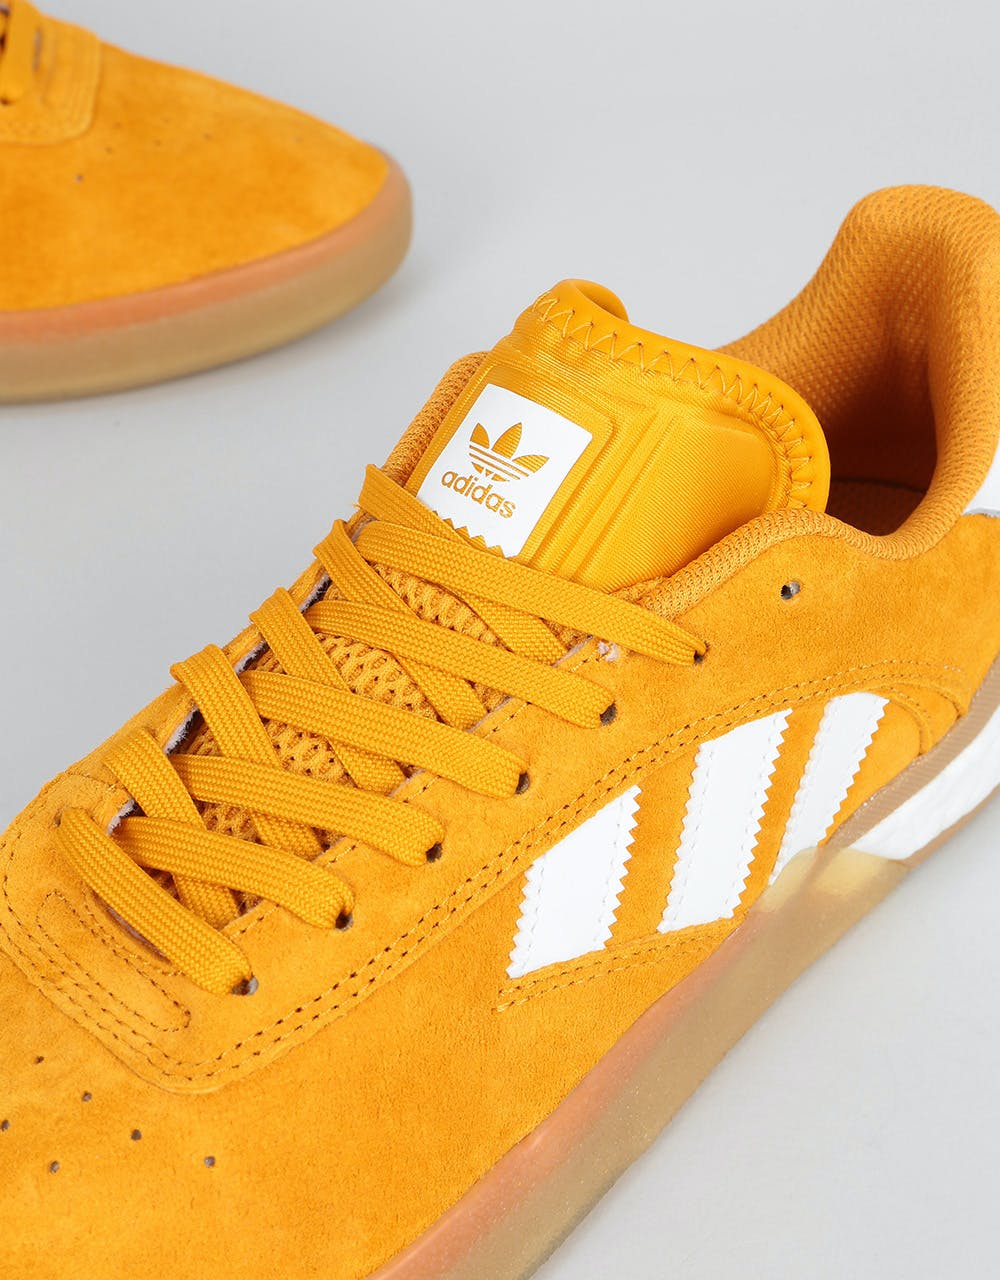 Adidas 3ST.004 Skate Shoes - Tactile Yellow/White/Gum